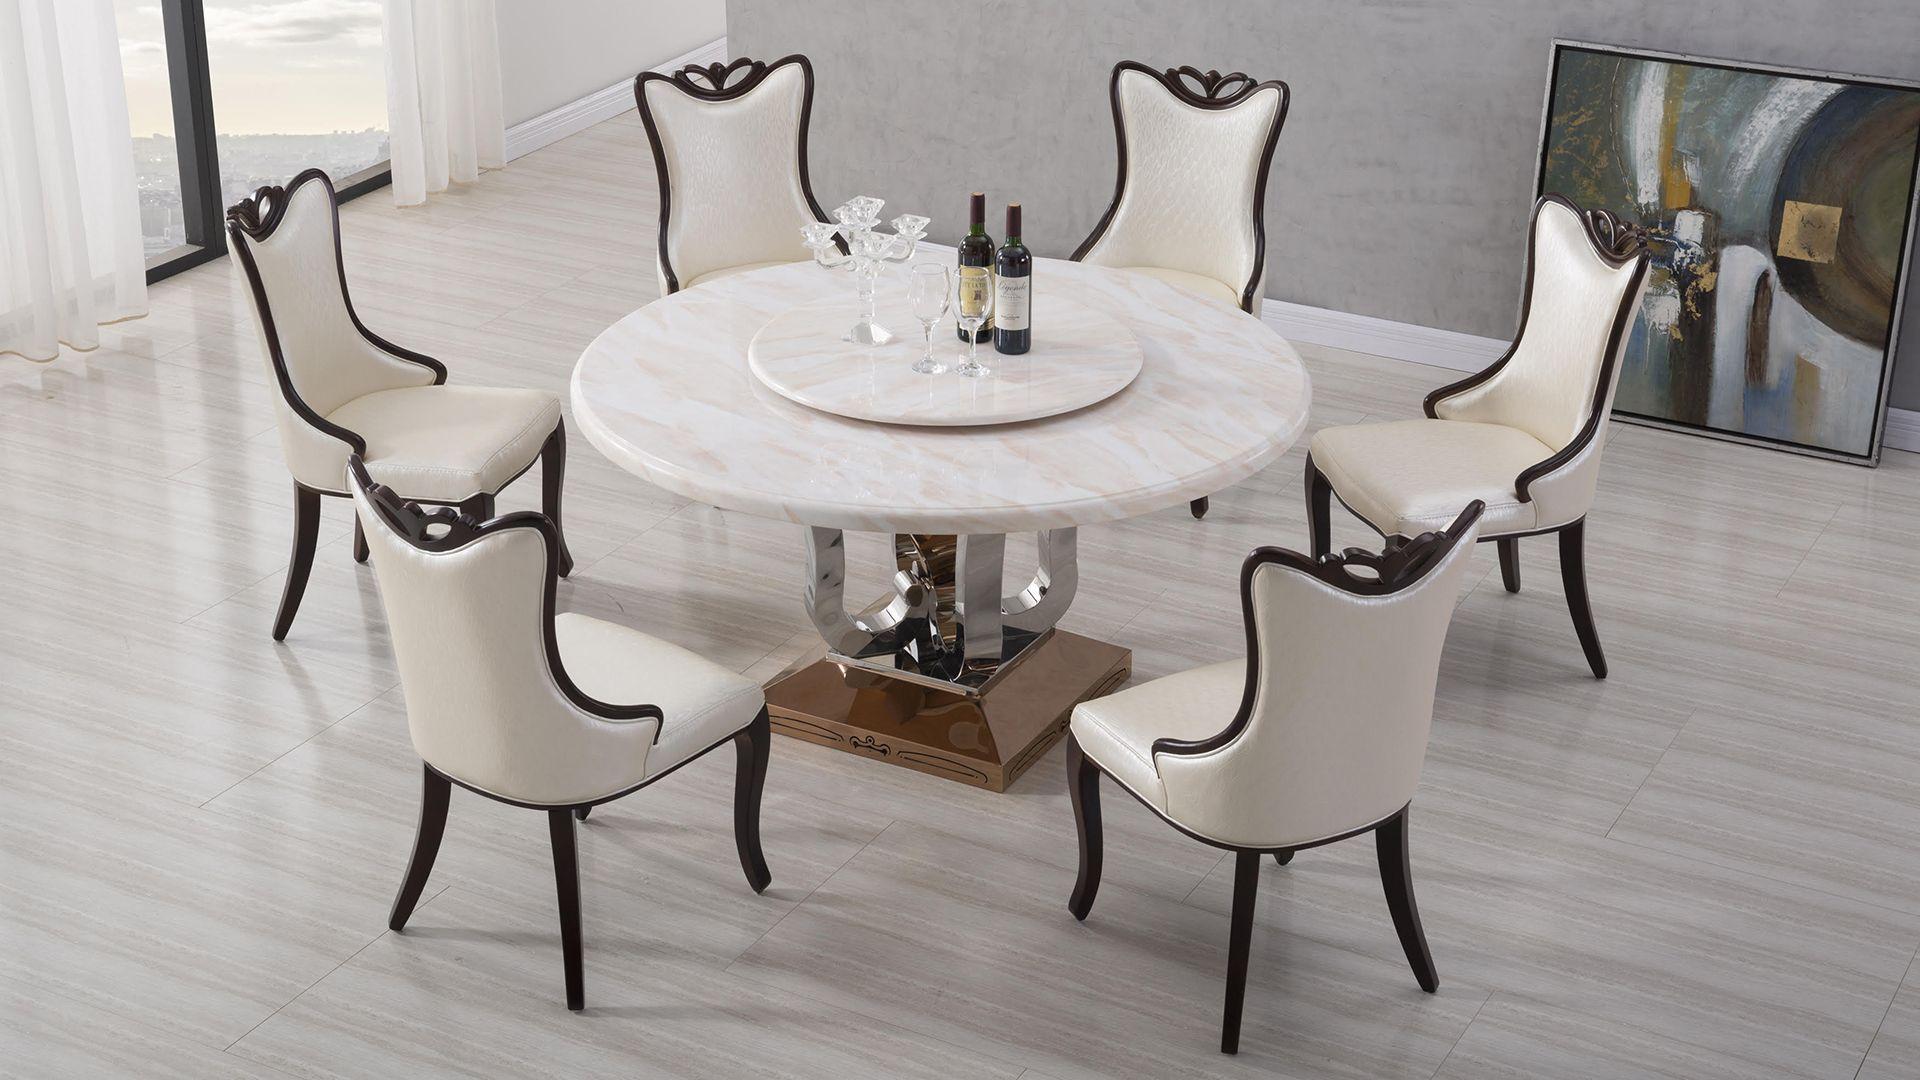 Modern Dining Table Set DT-H029 / CK-H1606-CRM DT-H029-7PC in Pearl, Cream, Natural PU